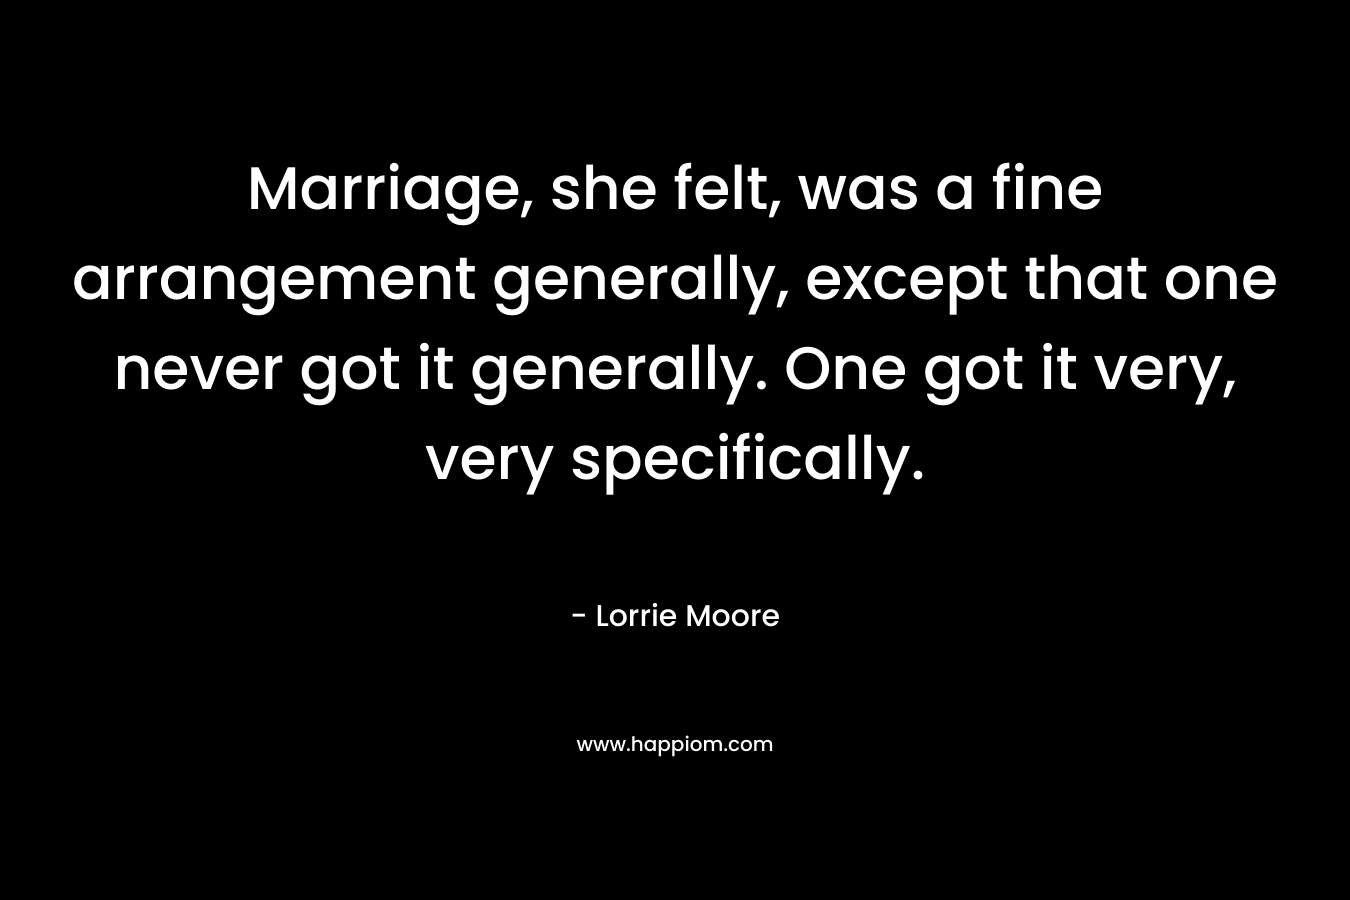 Marriage, she felt, was a fine arrangement generally, except that one never got it generally. One got it very, very specifically.